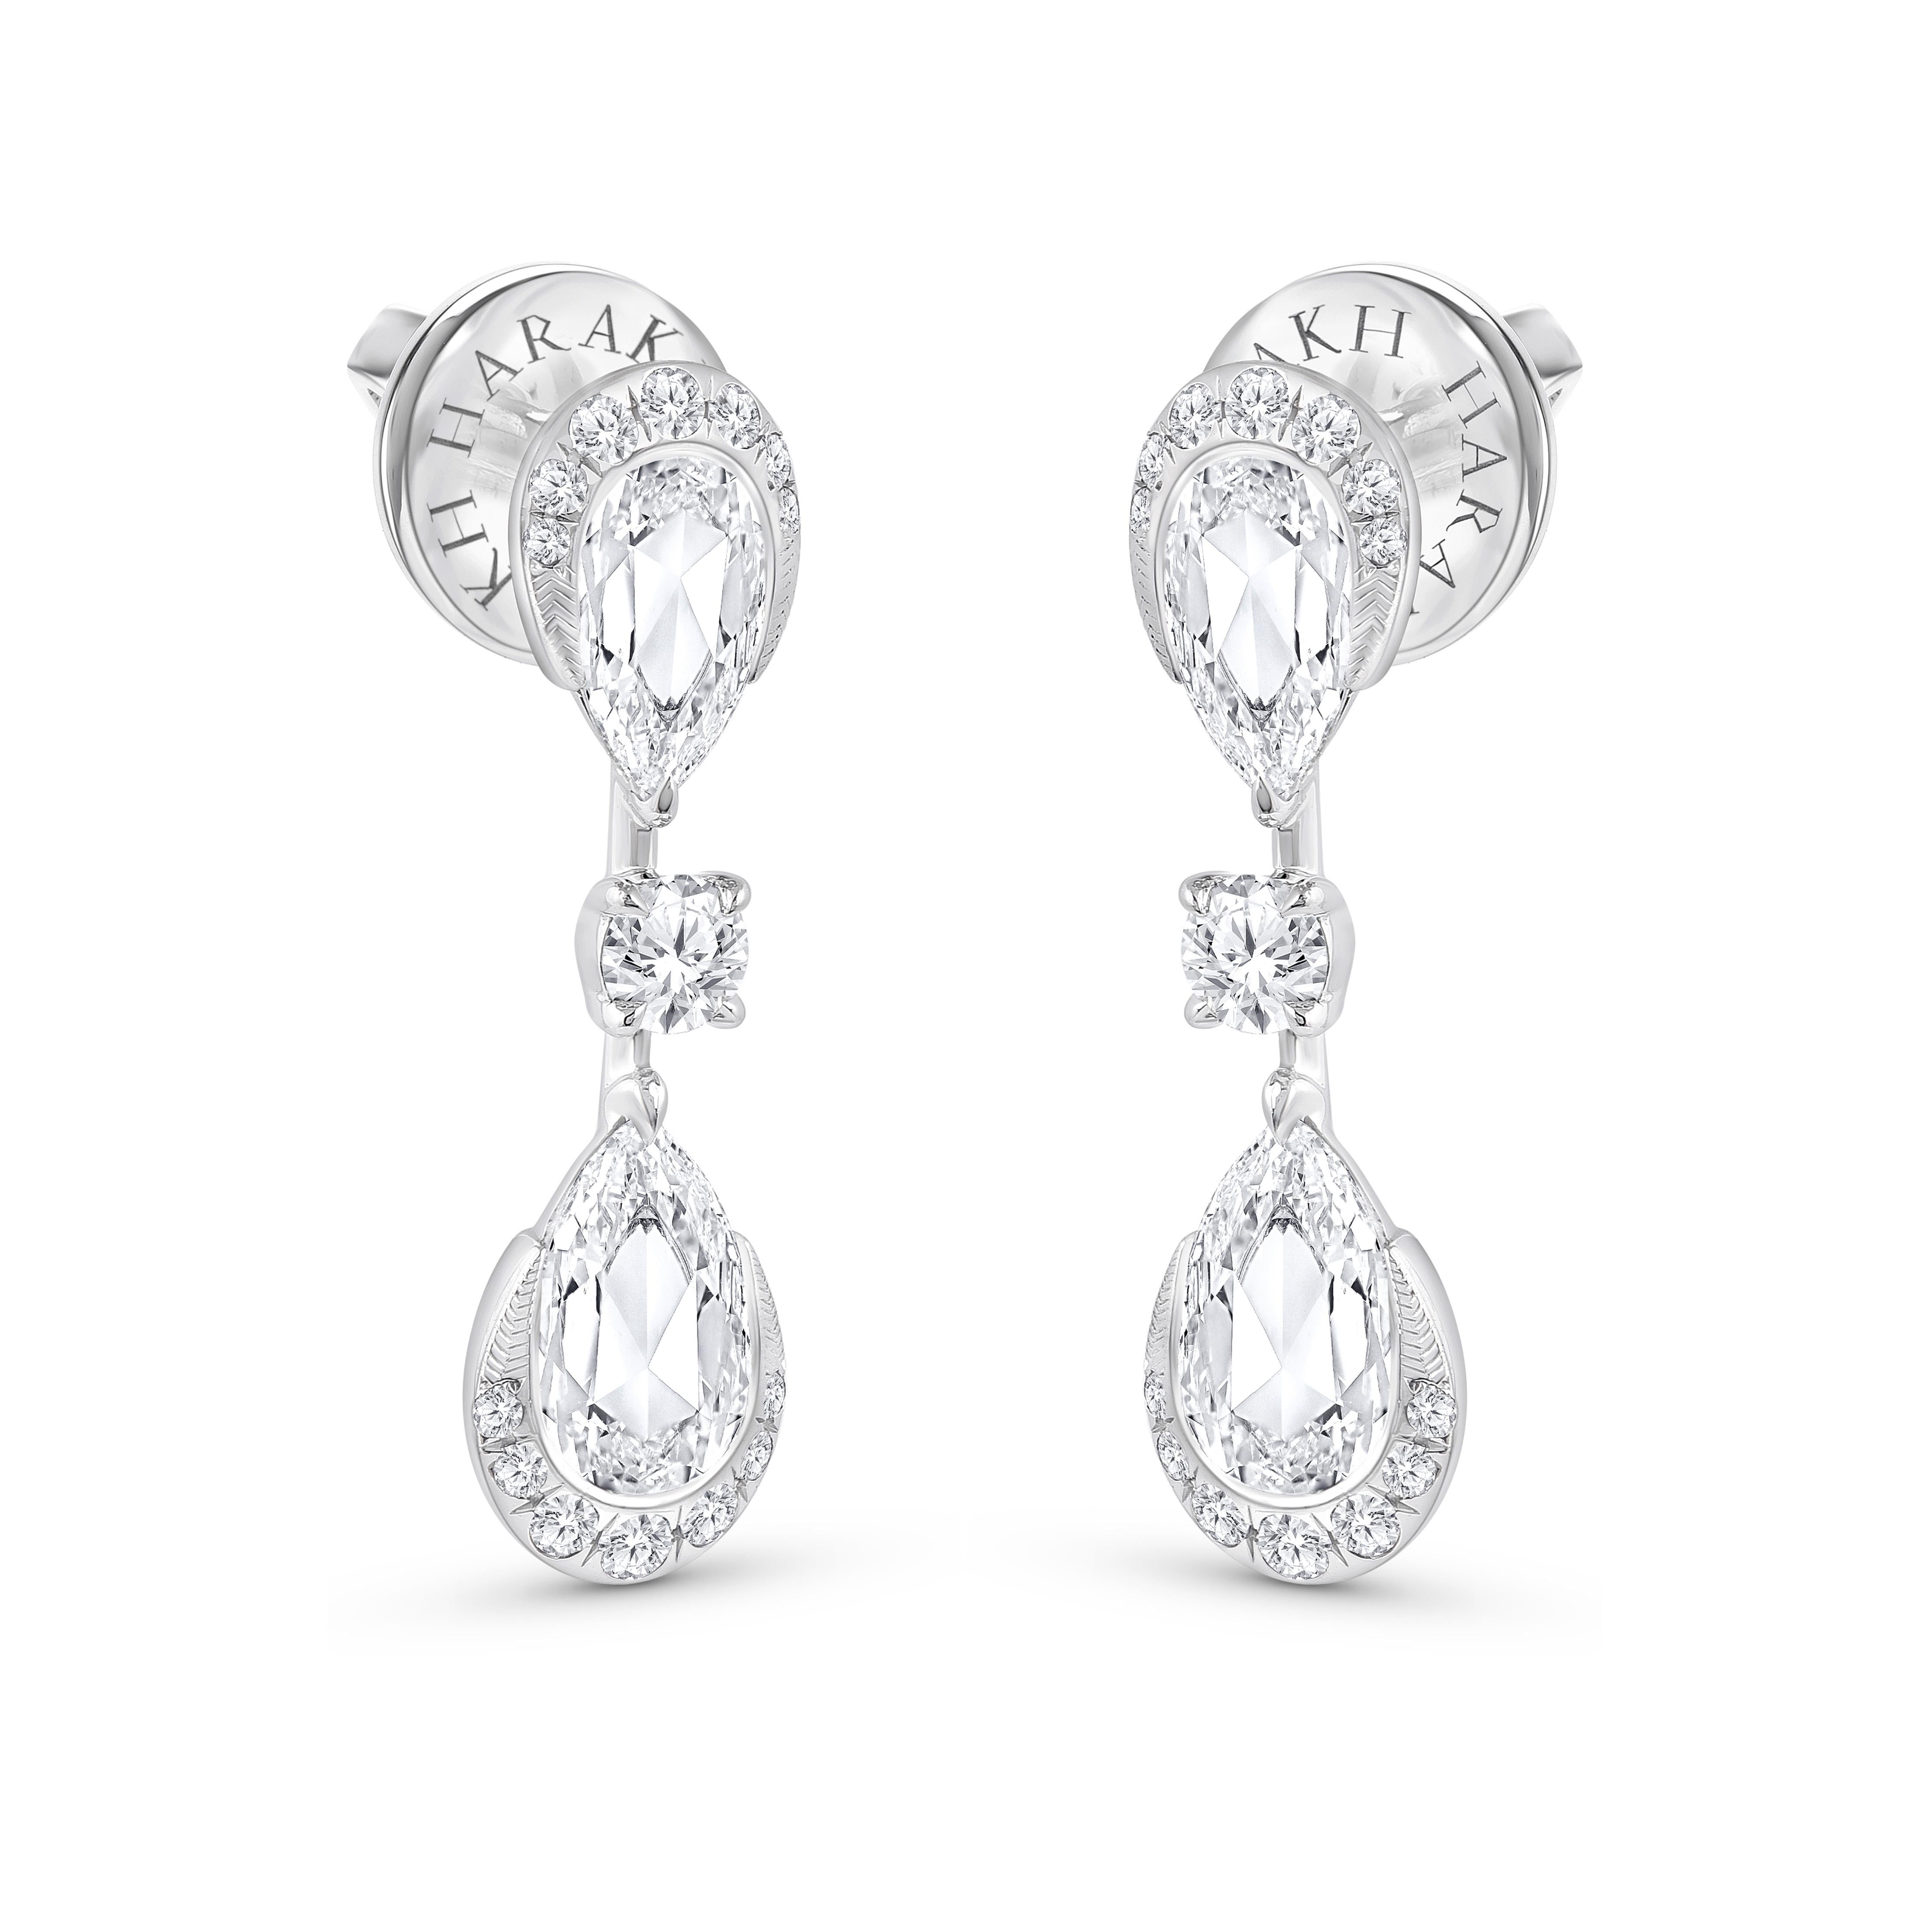 Inspired by the JOY of experiencing a gushing waterfall, these cascade earrings are studded with brilliant and rose cut diamonds dripping delicately. The diamonds are graded as F color and VS2 clarity. The total diamond weight of the earrings is 1